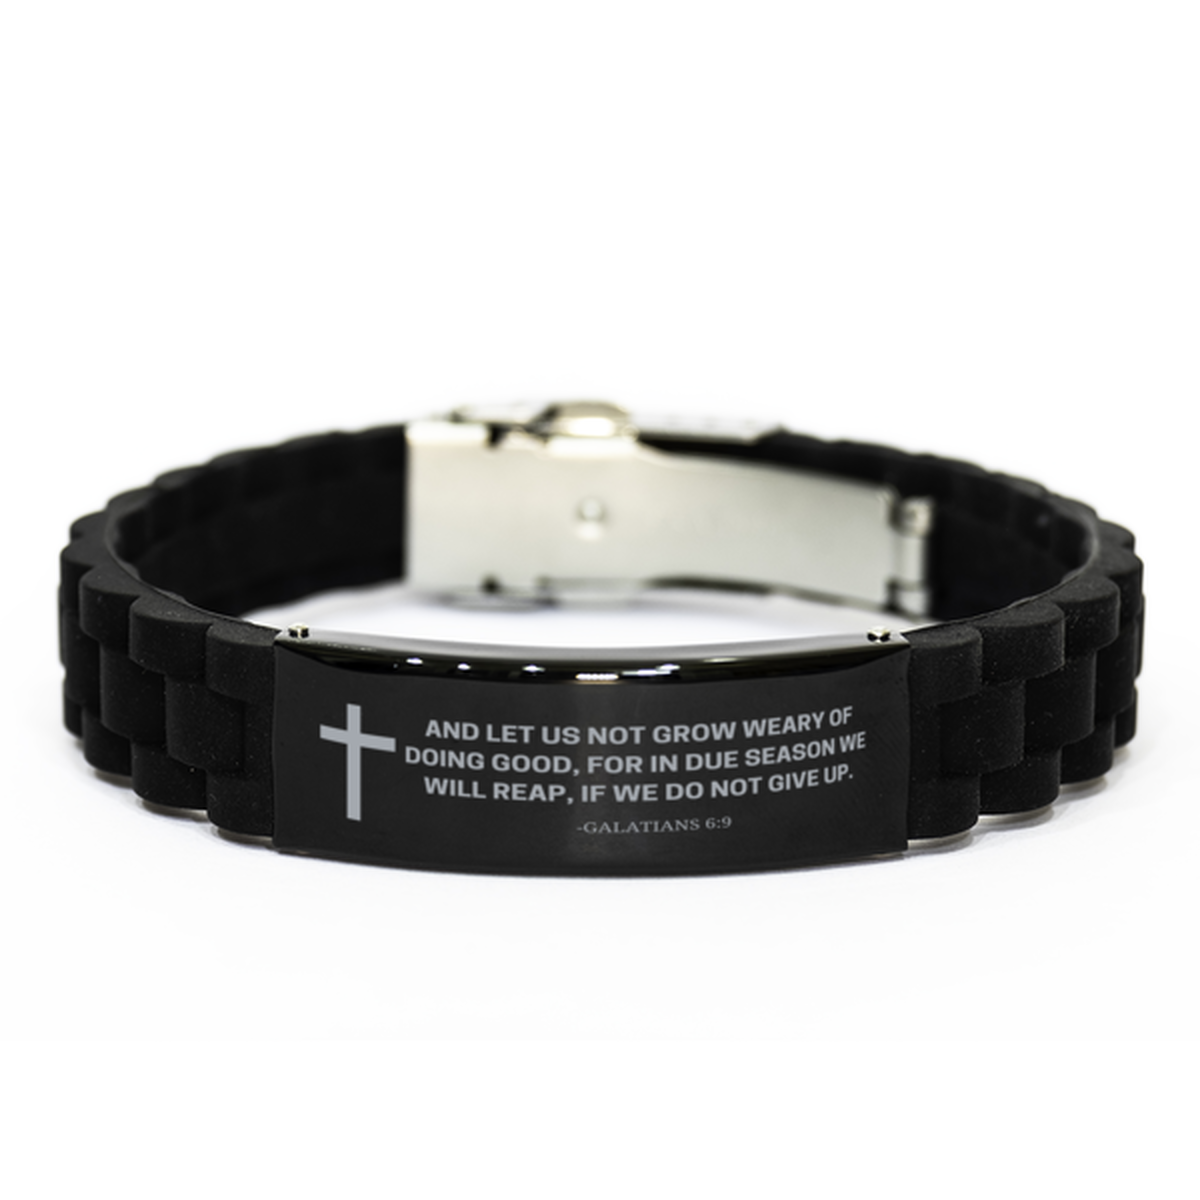 Baptism Gifts For Teenage Boys Girls, Christian Bible Verse Black Glidelock Clasp Bracelet, And let us not grow weary, Catholic Confirmation Gifts for Son, Godson, Grandson, Nephew